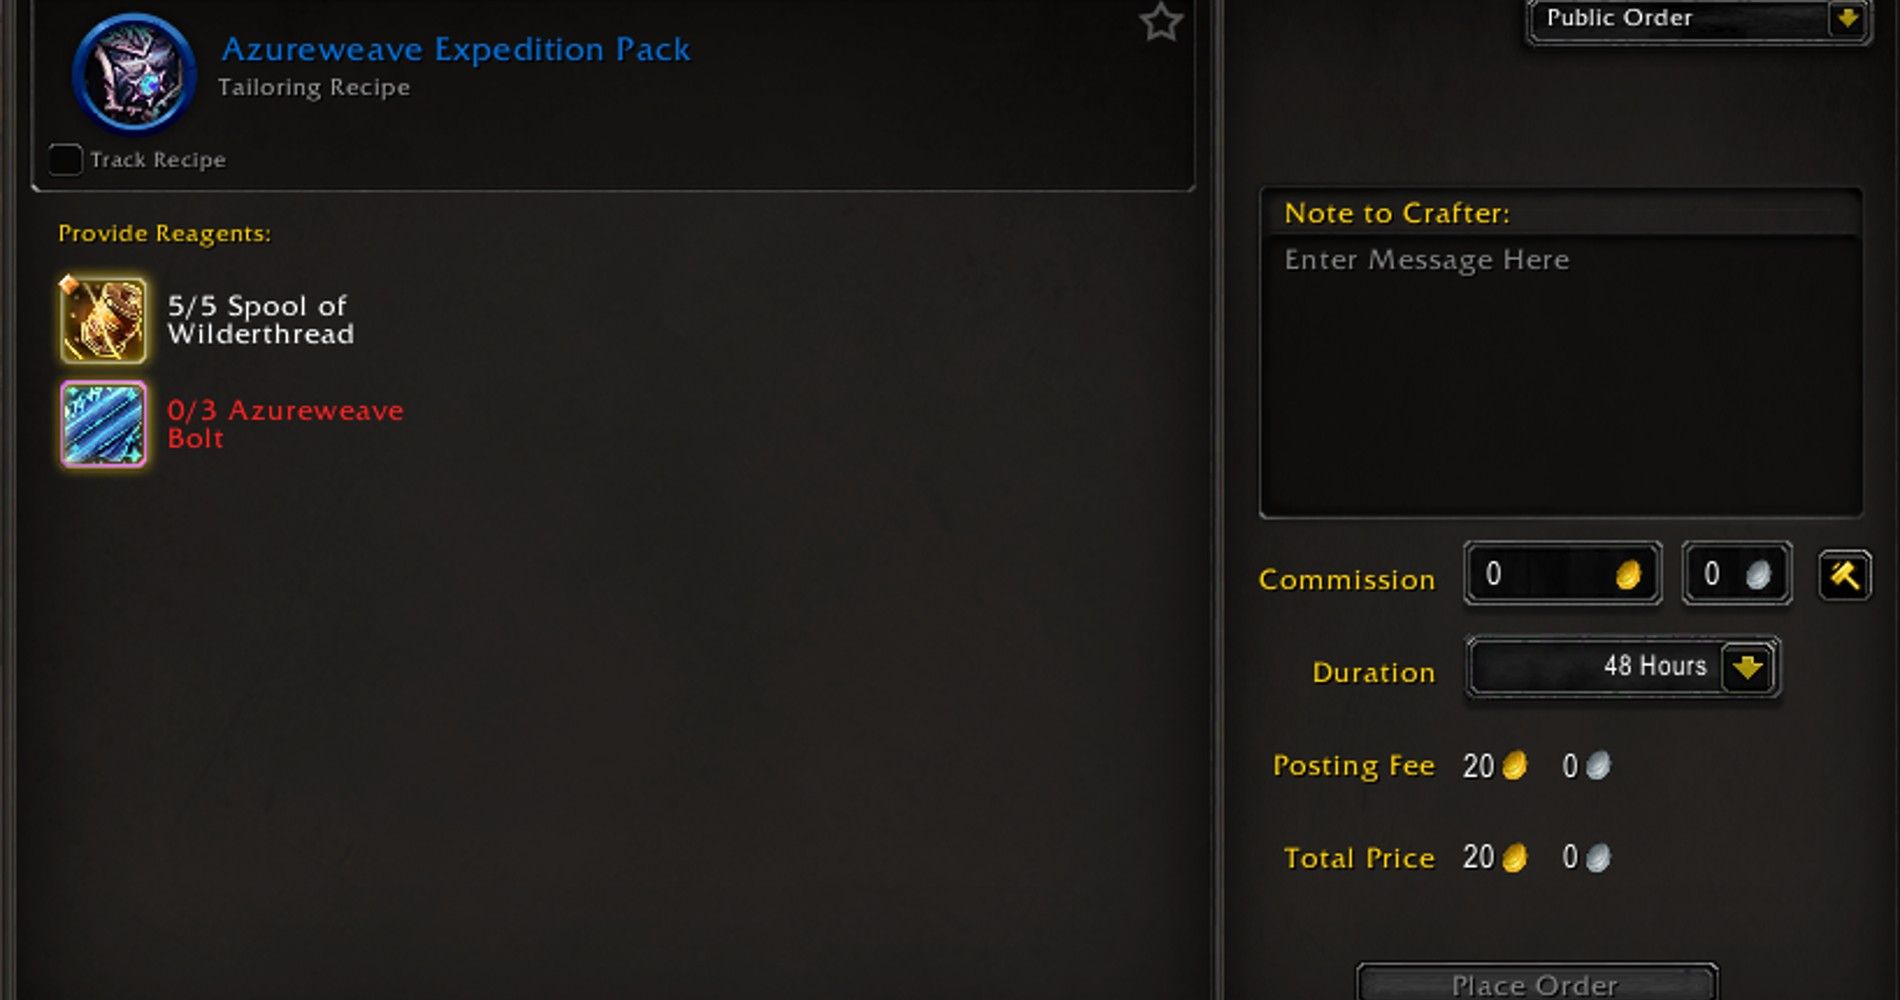 Requesting a Crafting Order for an Azureweave Expedition Pack in World of Warcraft.